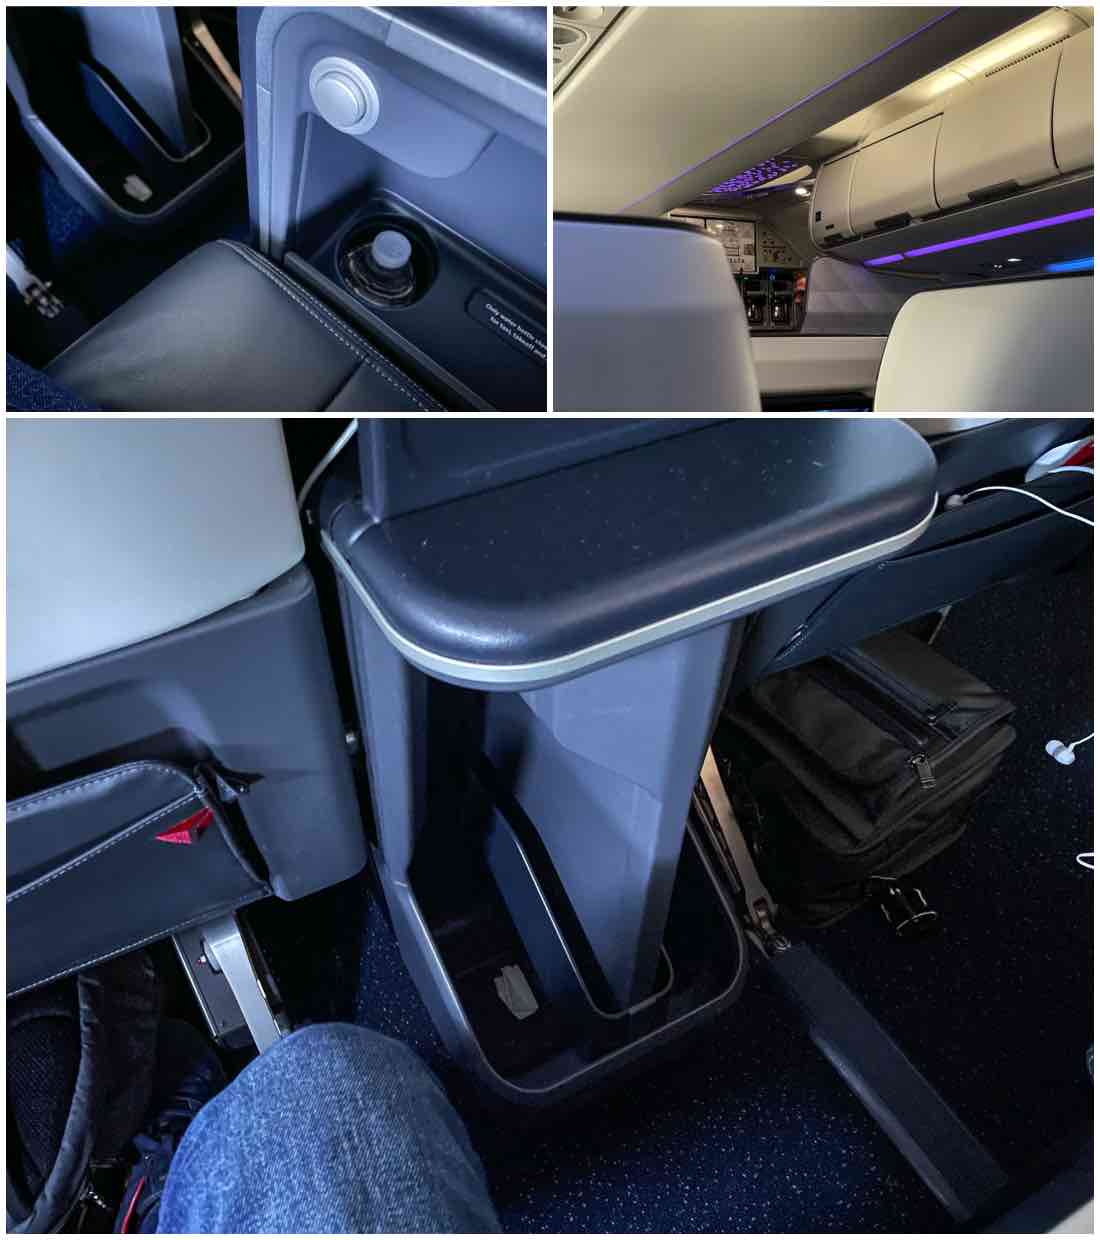 Delta A321neo first class seat details 